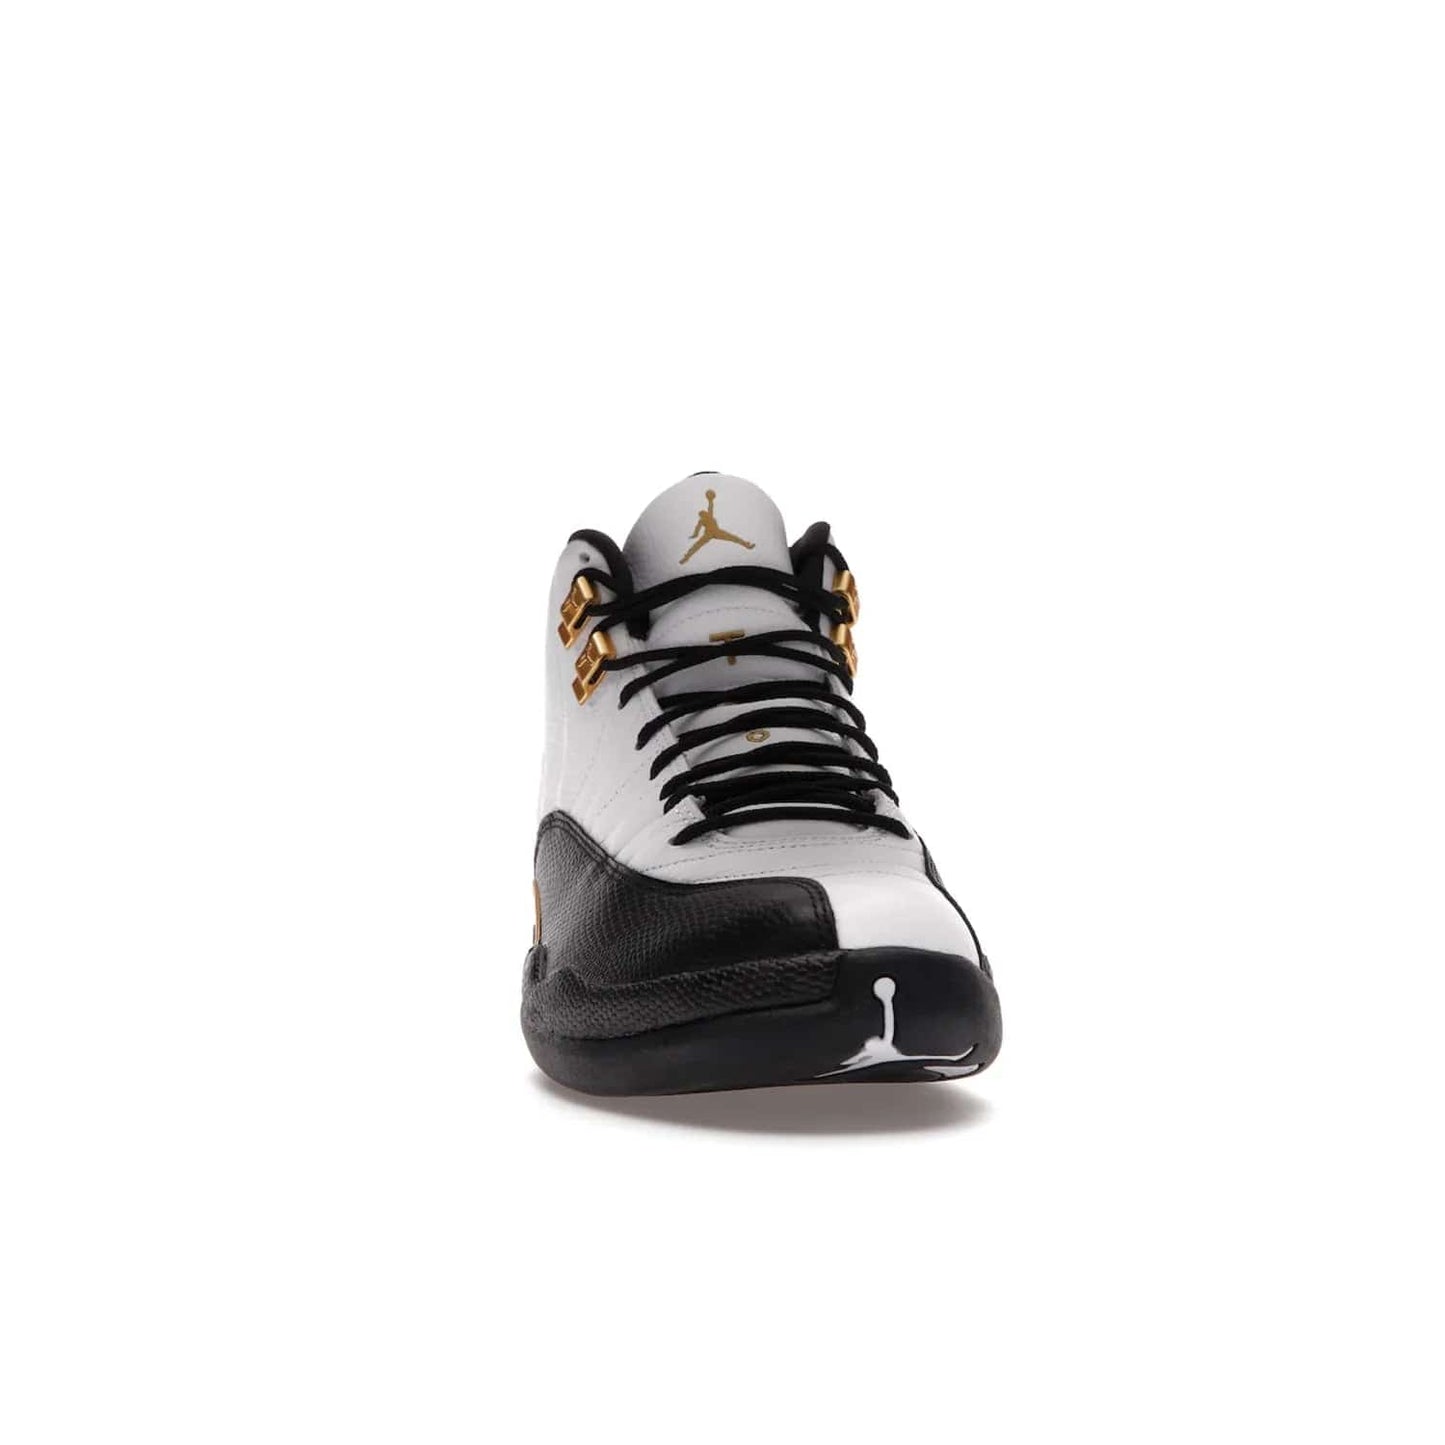 Jordan 12 Retro Royalty Taxi - Image 9 - Only at www.BallersClubKickz.com - Make a statement with the Air Jordan 12 Retro Royalty Taxi. Woven heel tag, gold plaquet, white tumbled leather upper plus a black toe wrap, make this modern take on the classic a must-have. Available in November 2021.